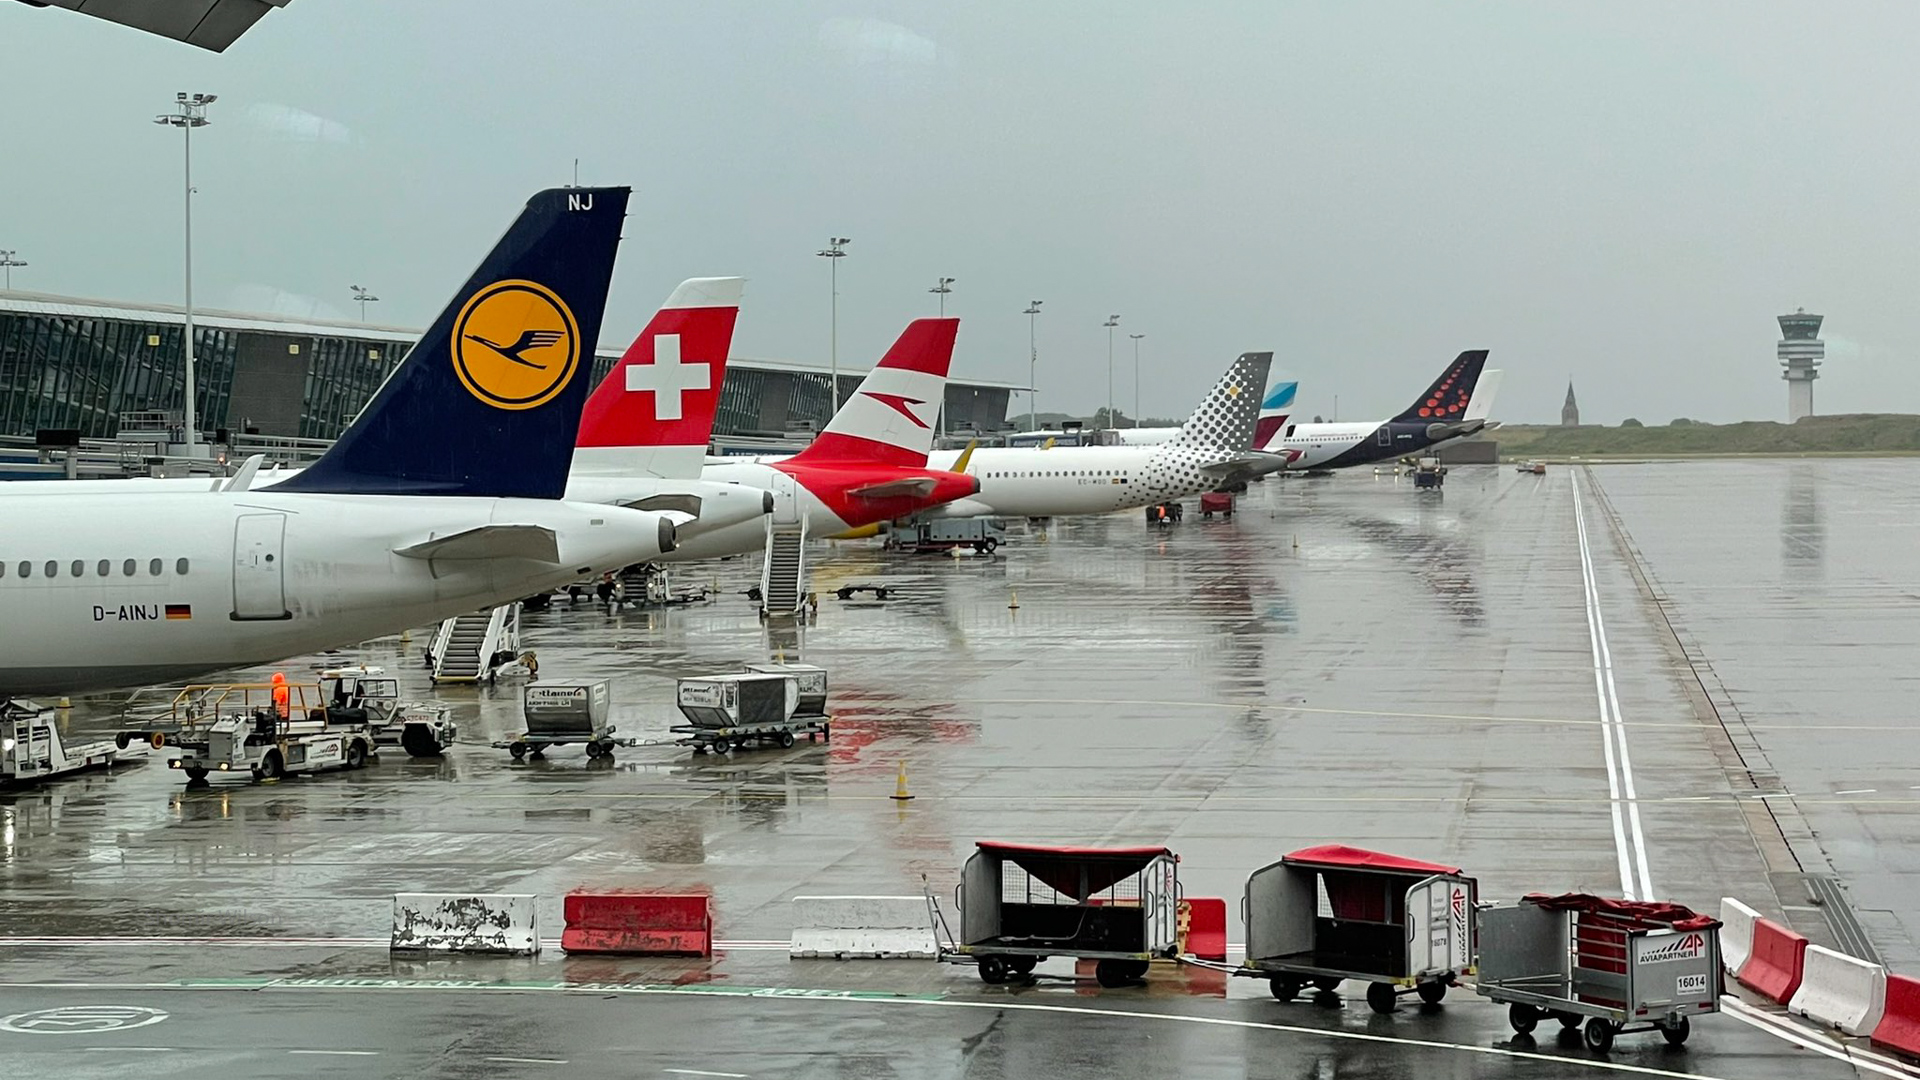 tails of jetliners representing many different airlines at an airport